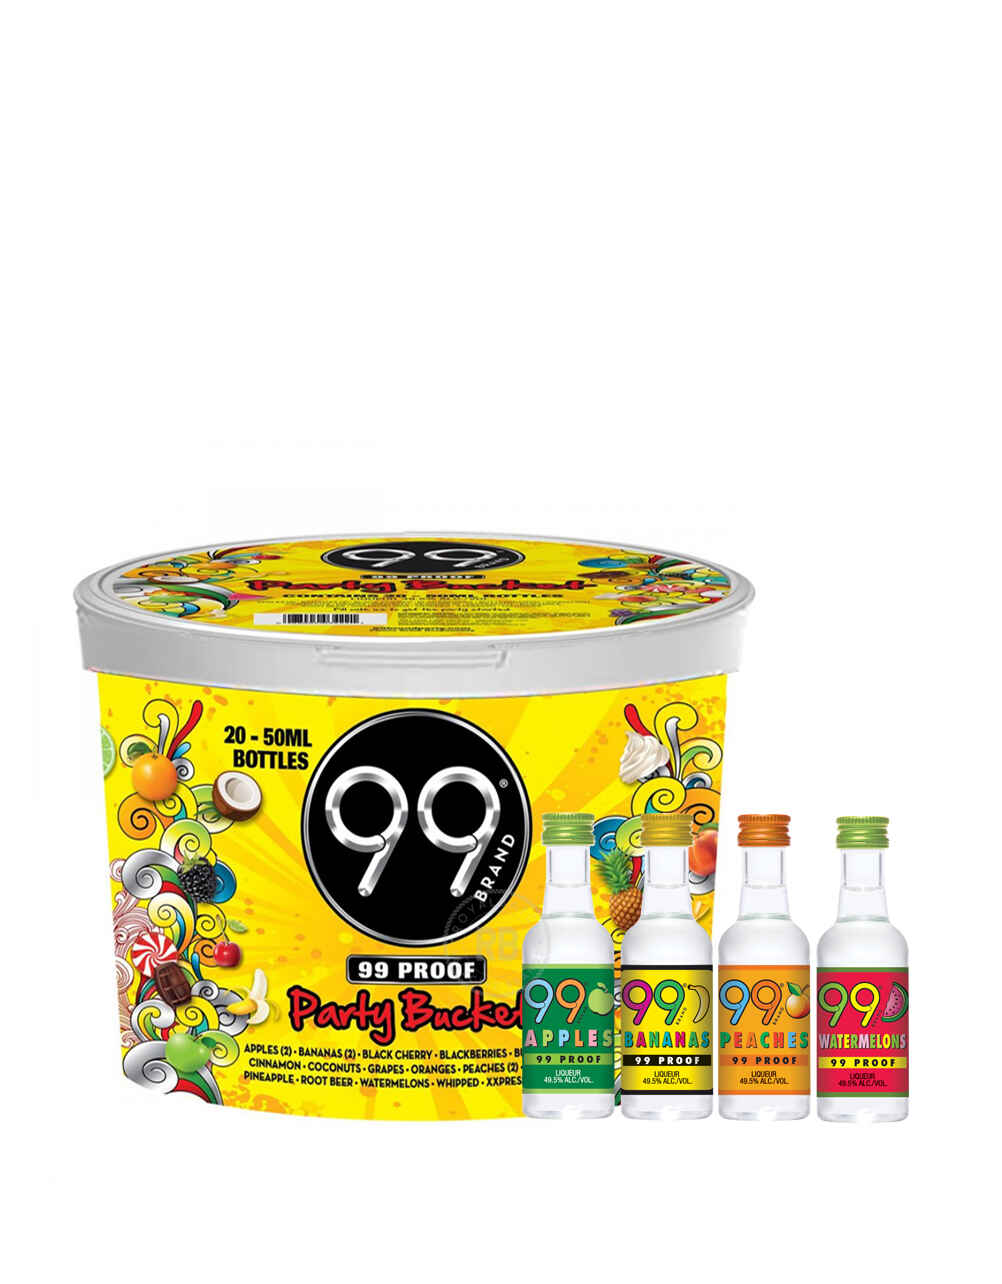 99 Brand Party Bucket (20 Pack) x 50ml